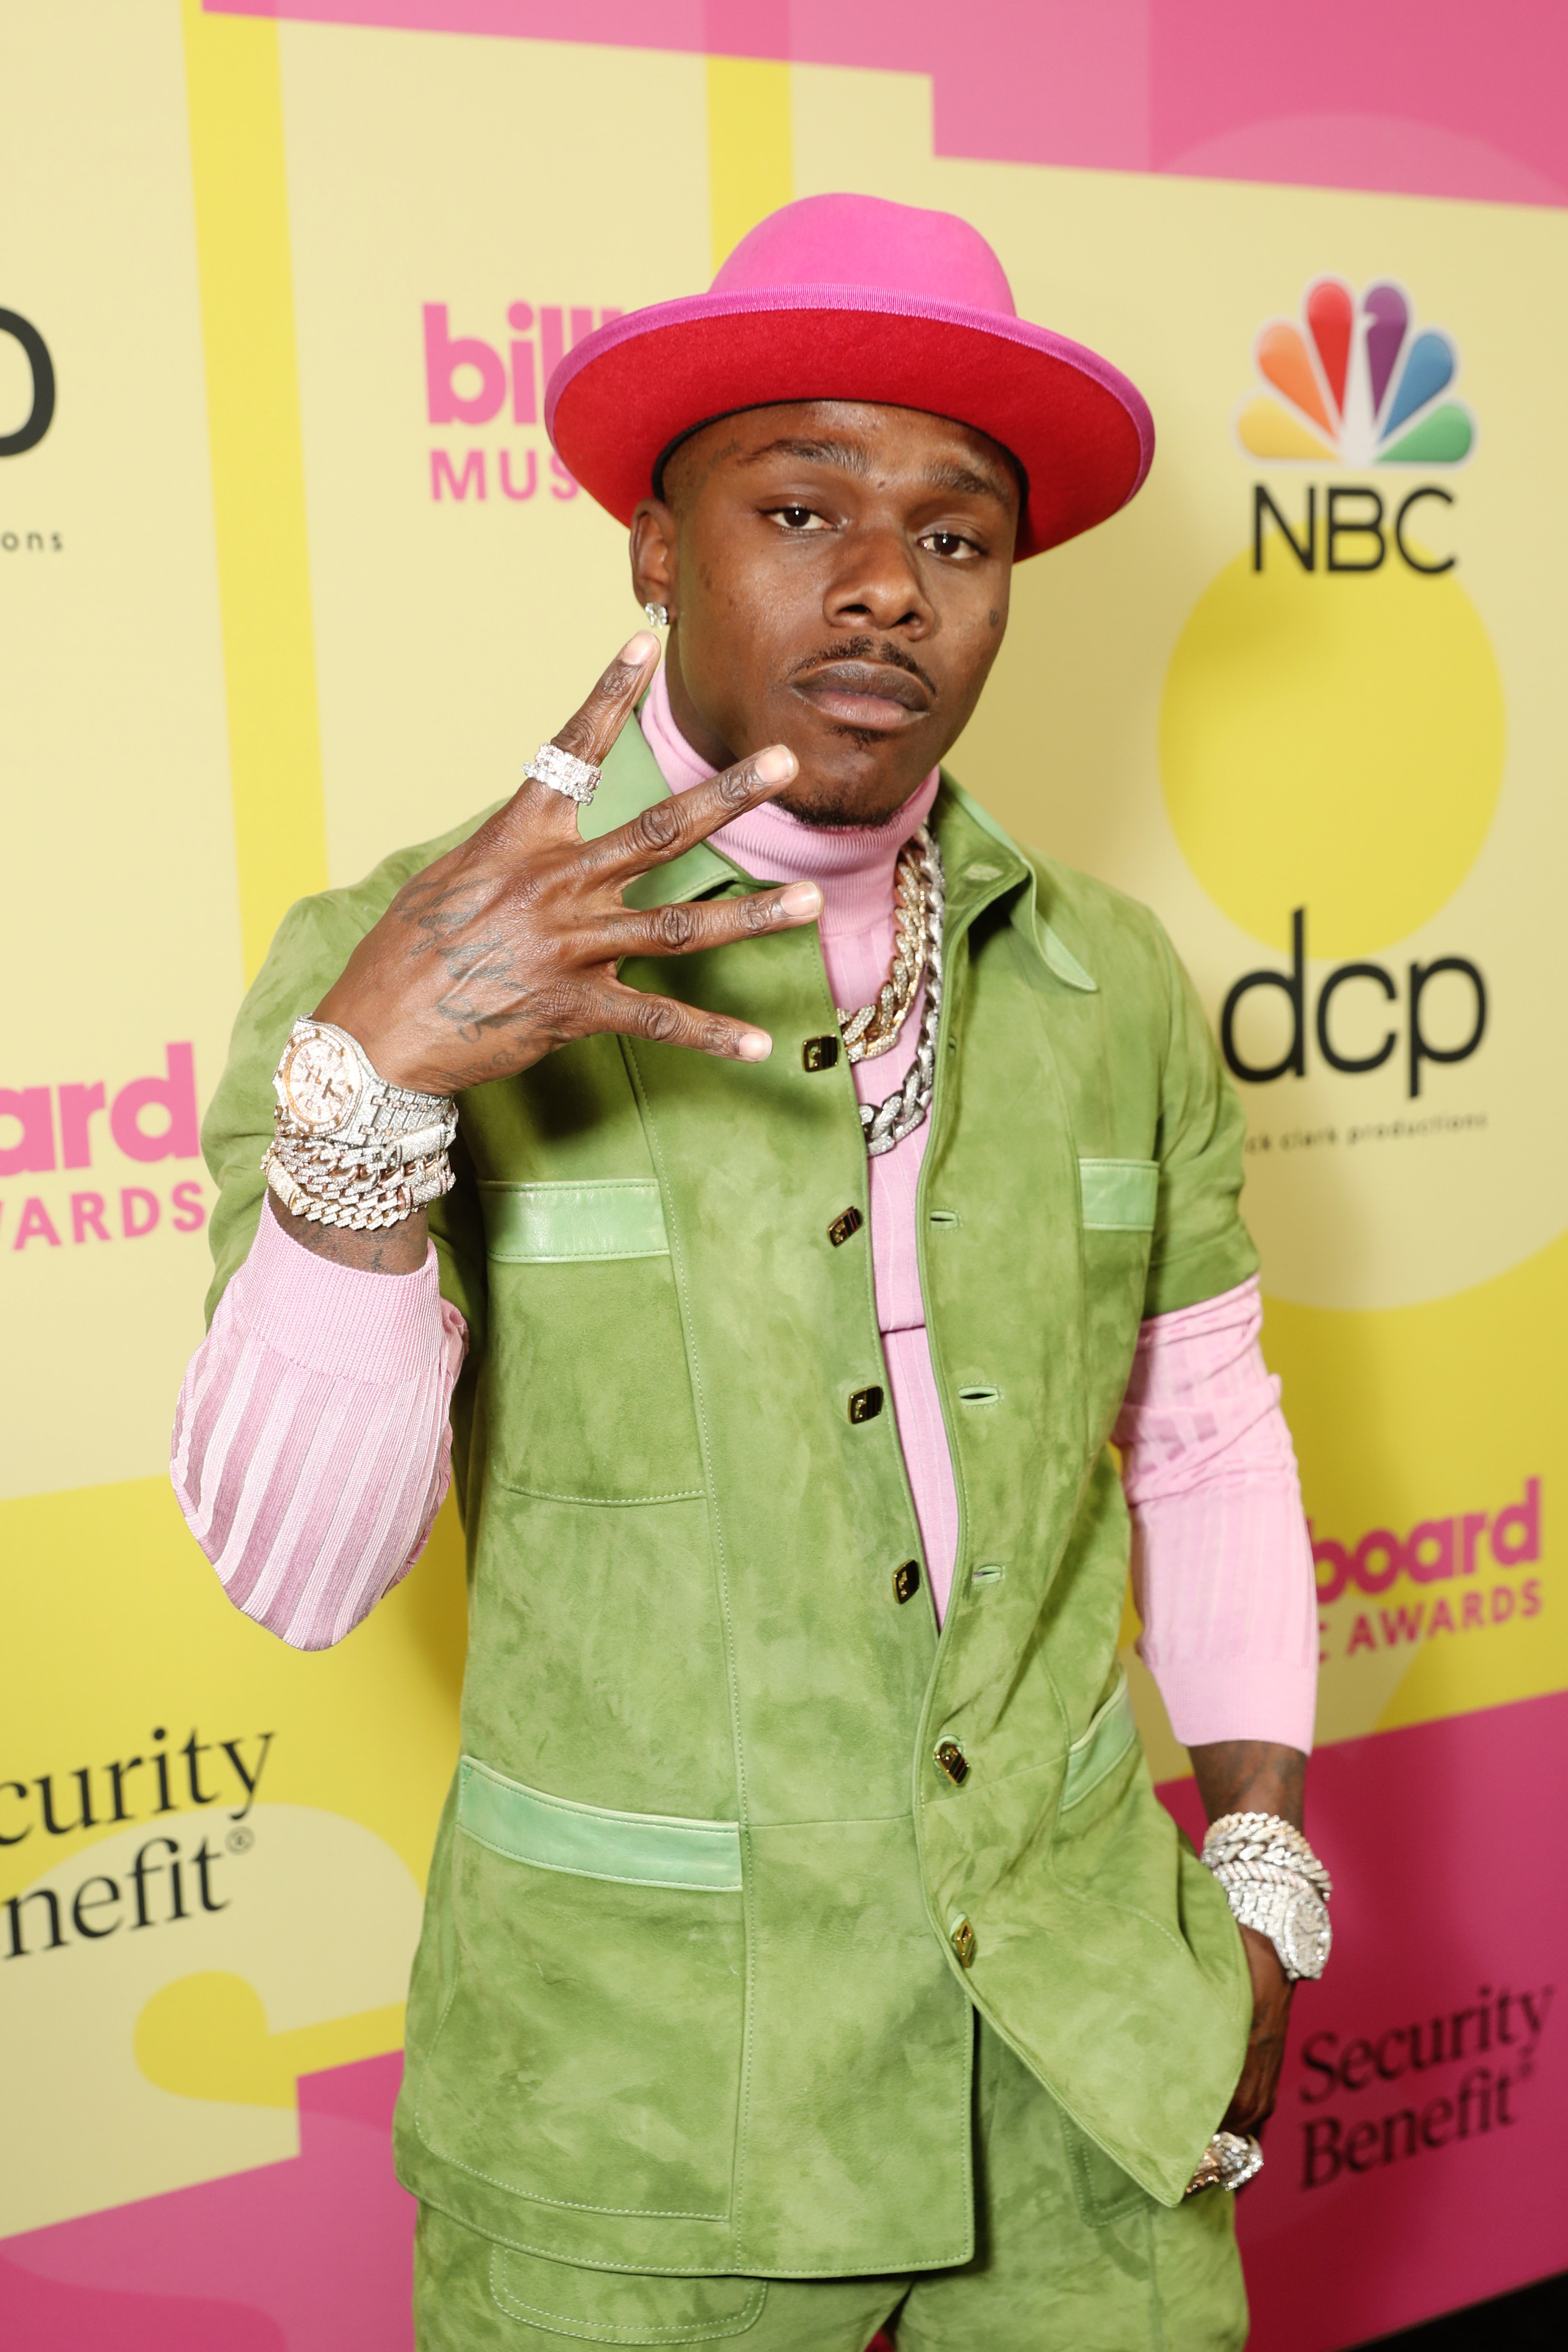 hat dababy outfits